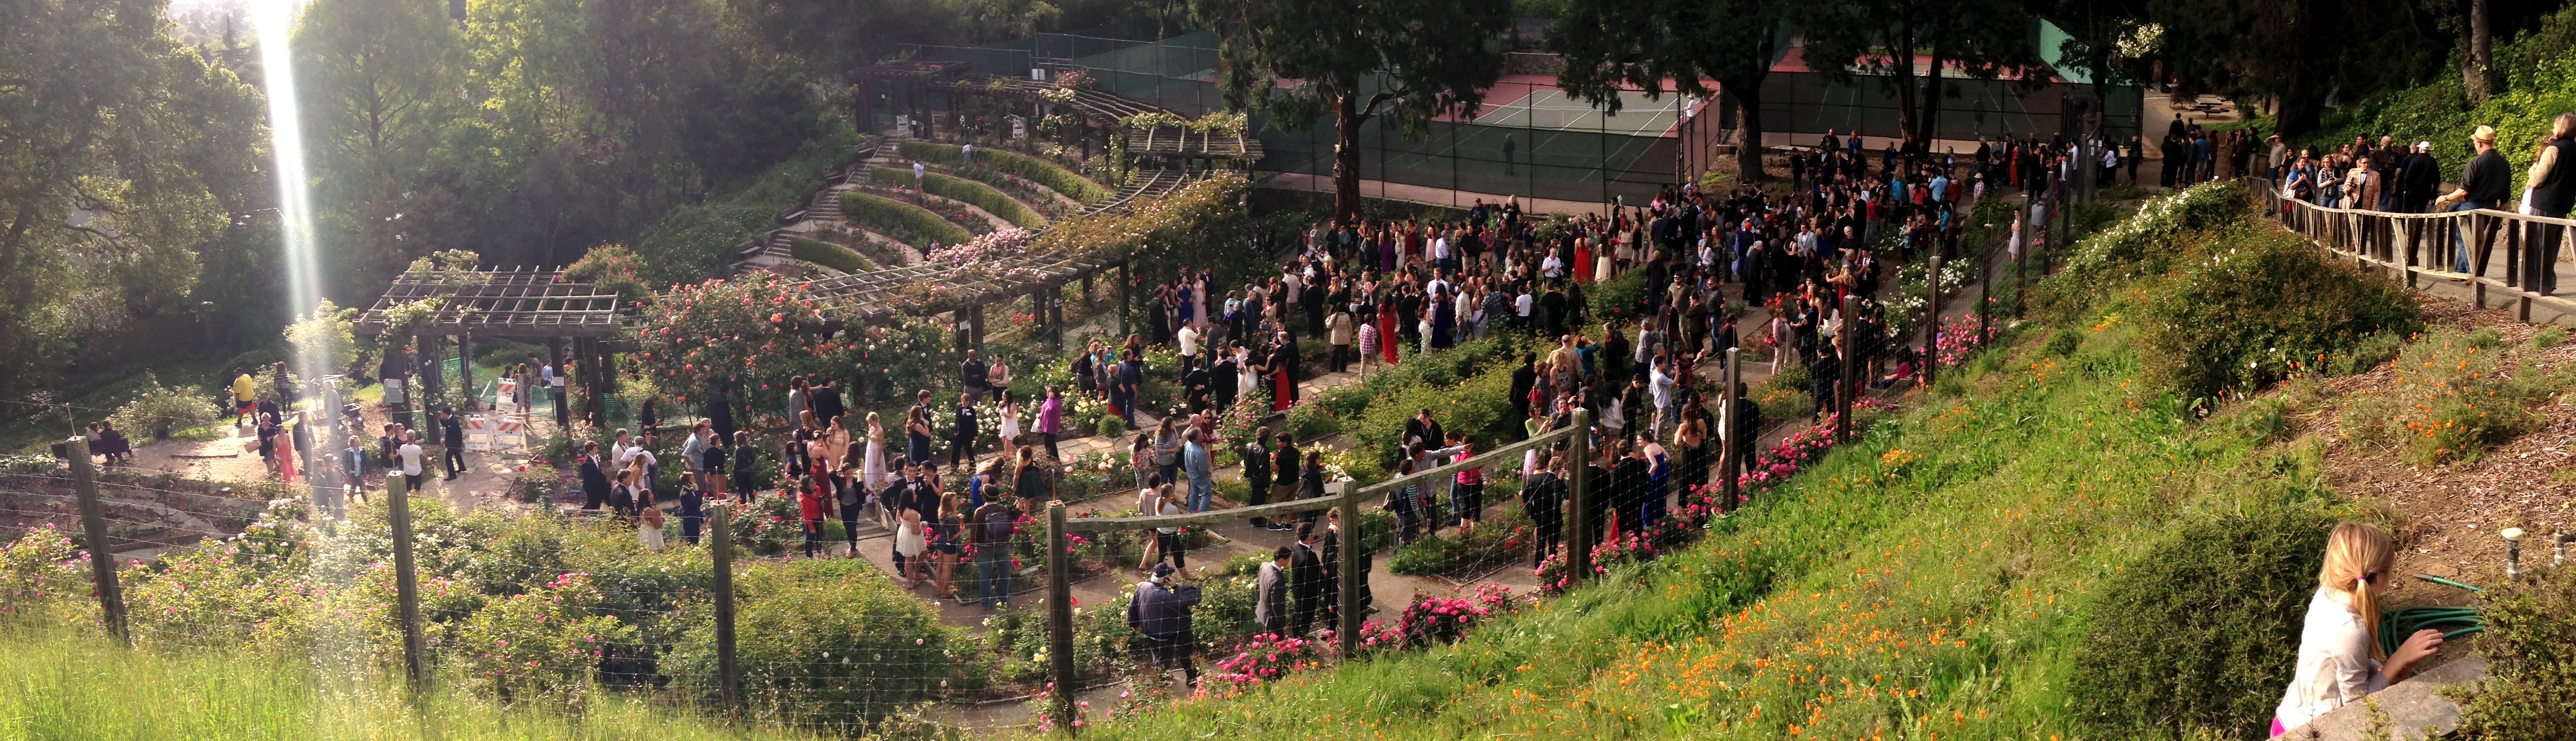 A gathering of people in a community. In this case at the Rose Garden in Berkeley California ~2014